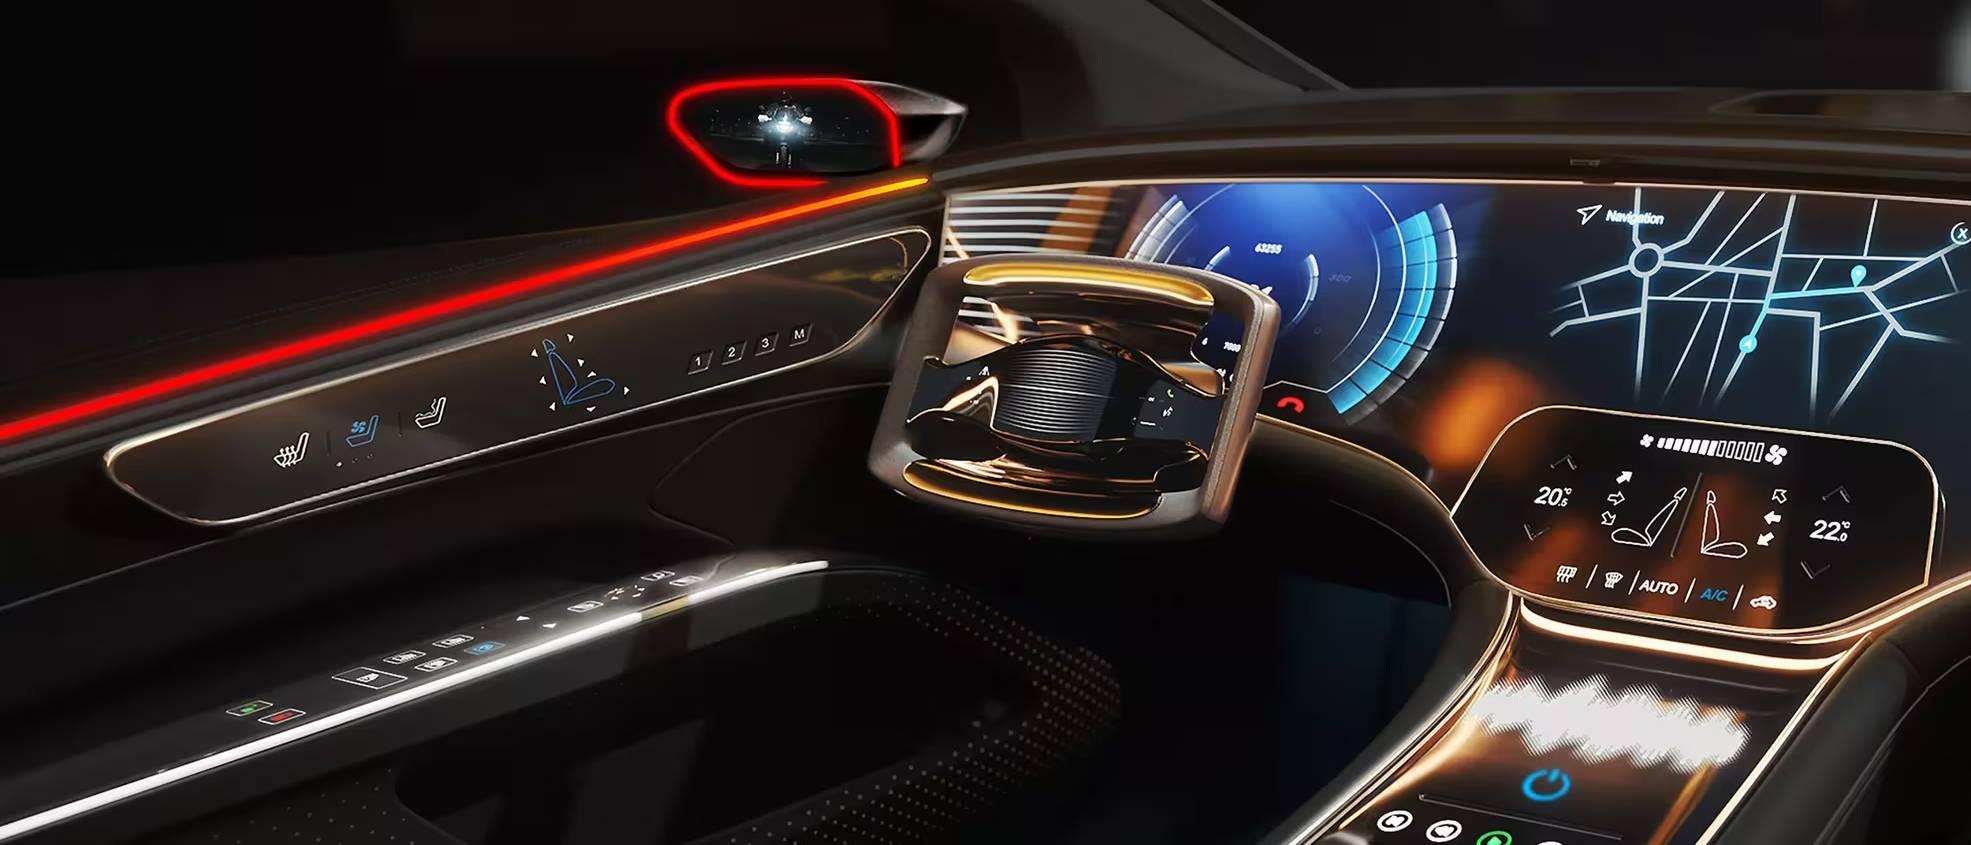 Car interior with ambient lighting and futuristic display designs